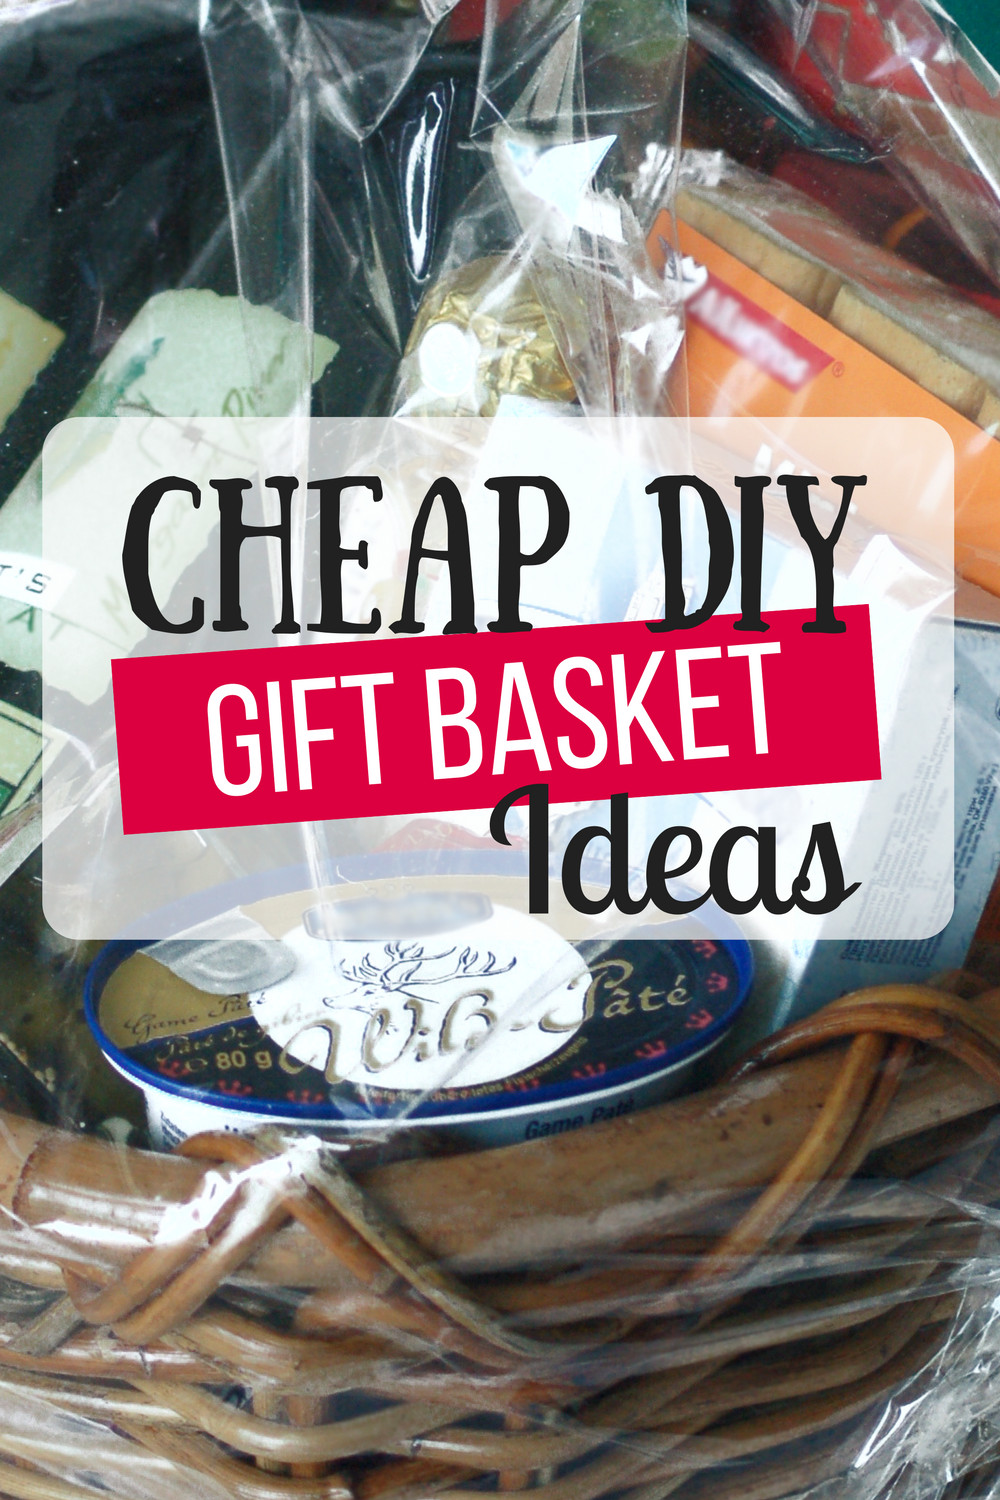 DIY Gift Baskets For Christmas
 Cheap DIY Gift Baskets The Busy Bud er